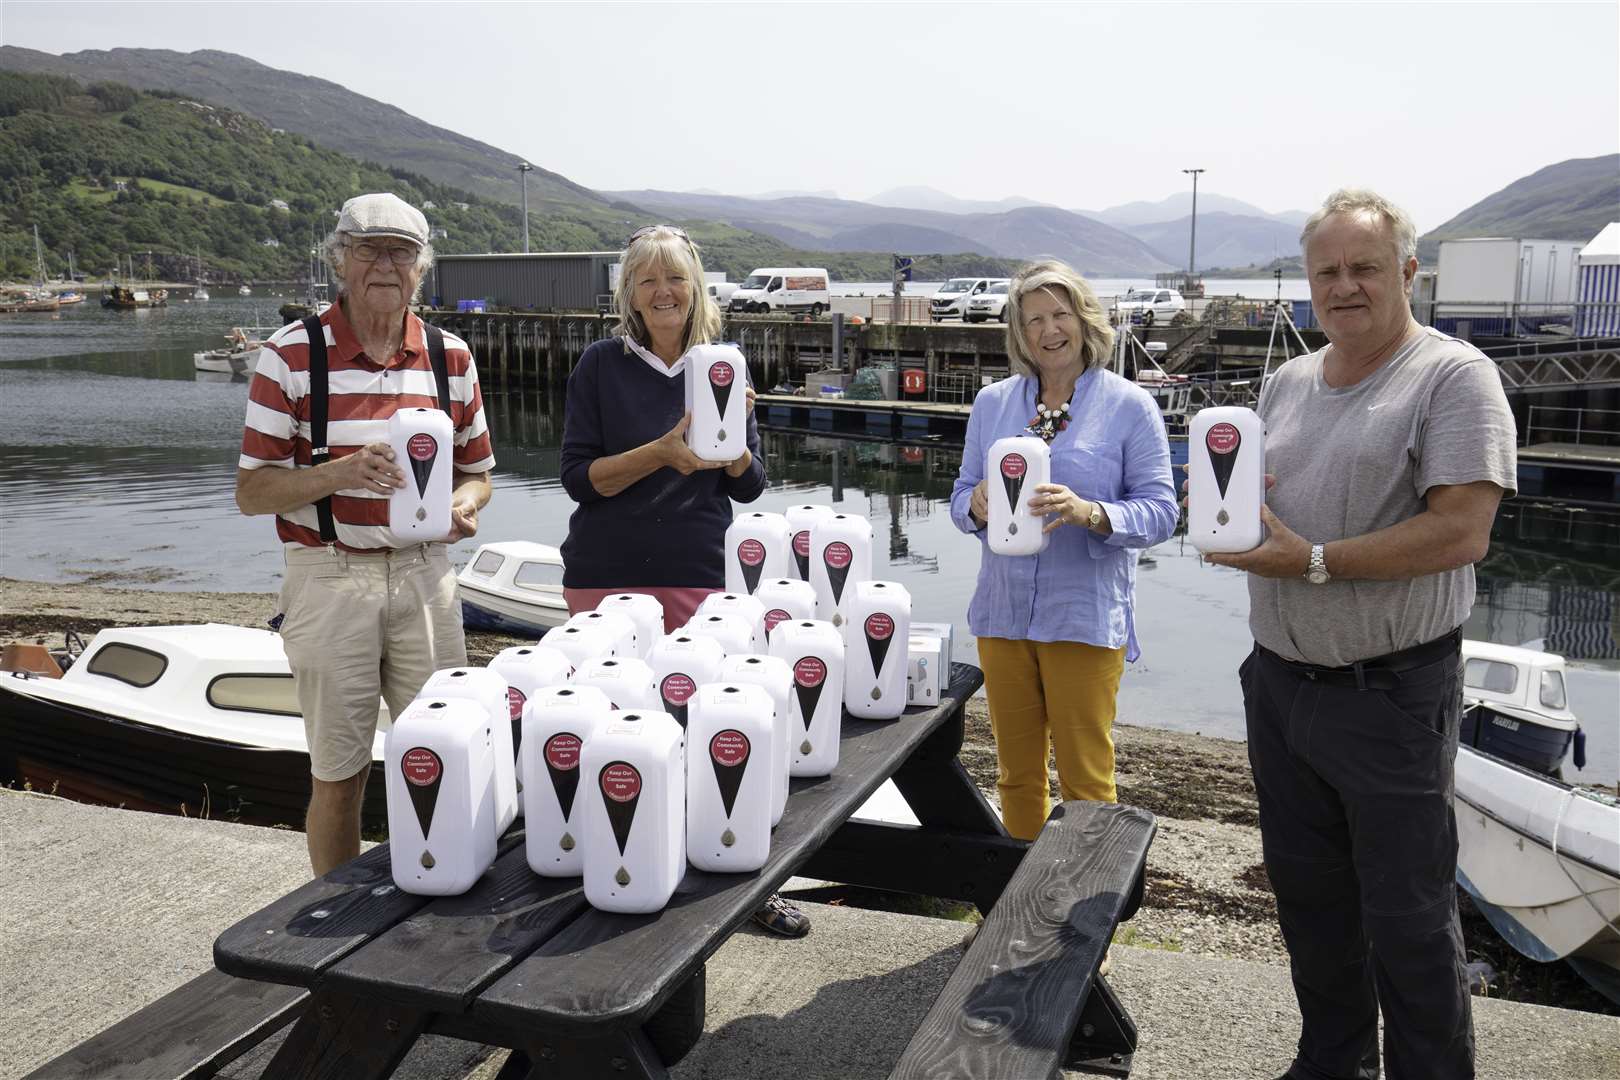 Pictured with the new hand sanitisers are Mike Turner, Secretary of Ullapool Golf Club, Angela Ford representing Welcome Ullapool, Katrina Thomson of the Captain’s Cabin and Charlie MacRae from Riverside Guest House.